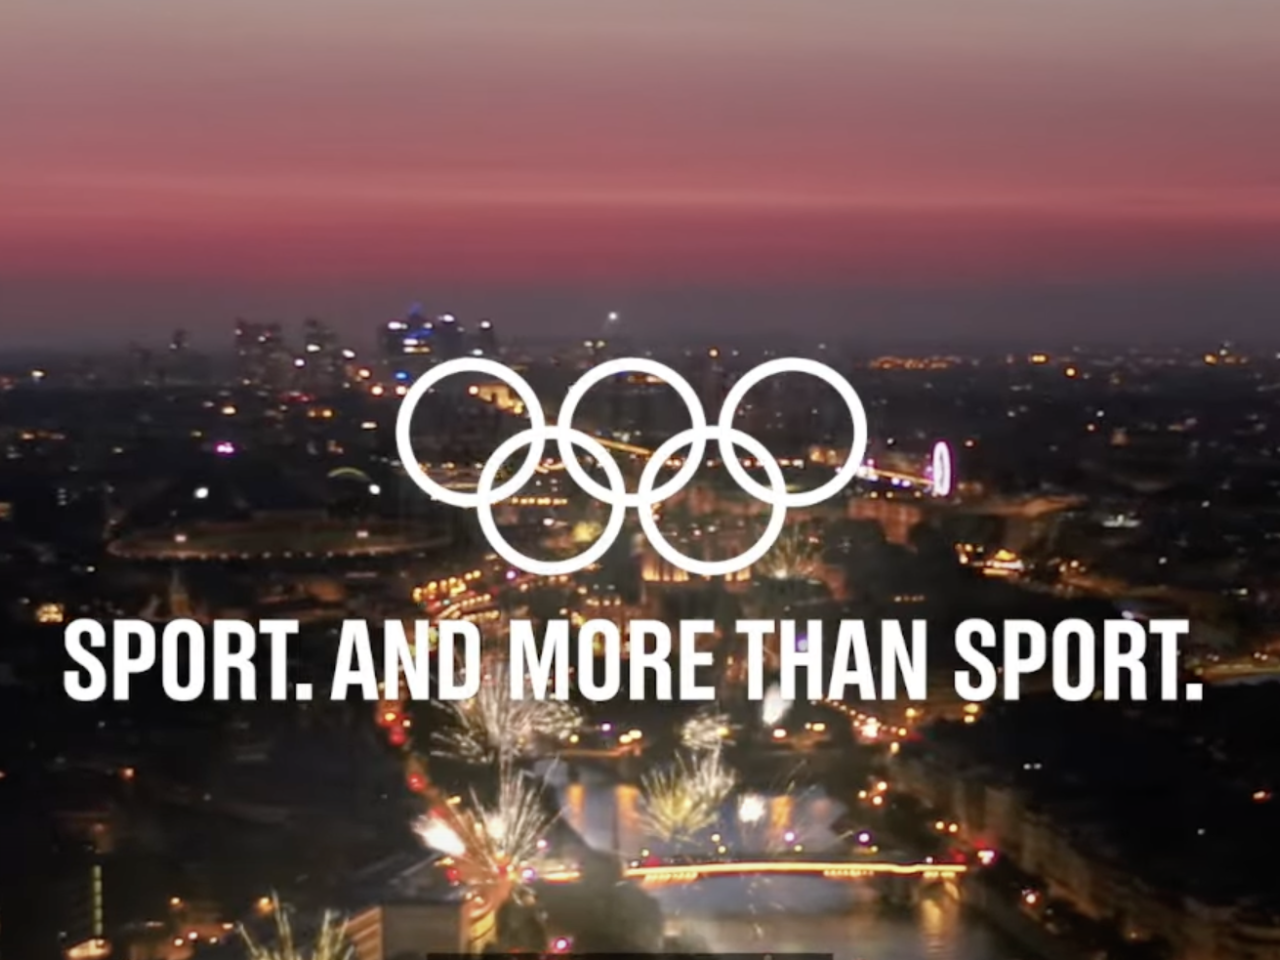 sport. and more than sport.